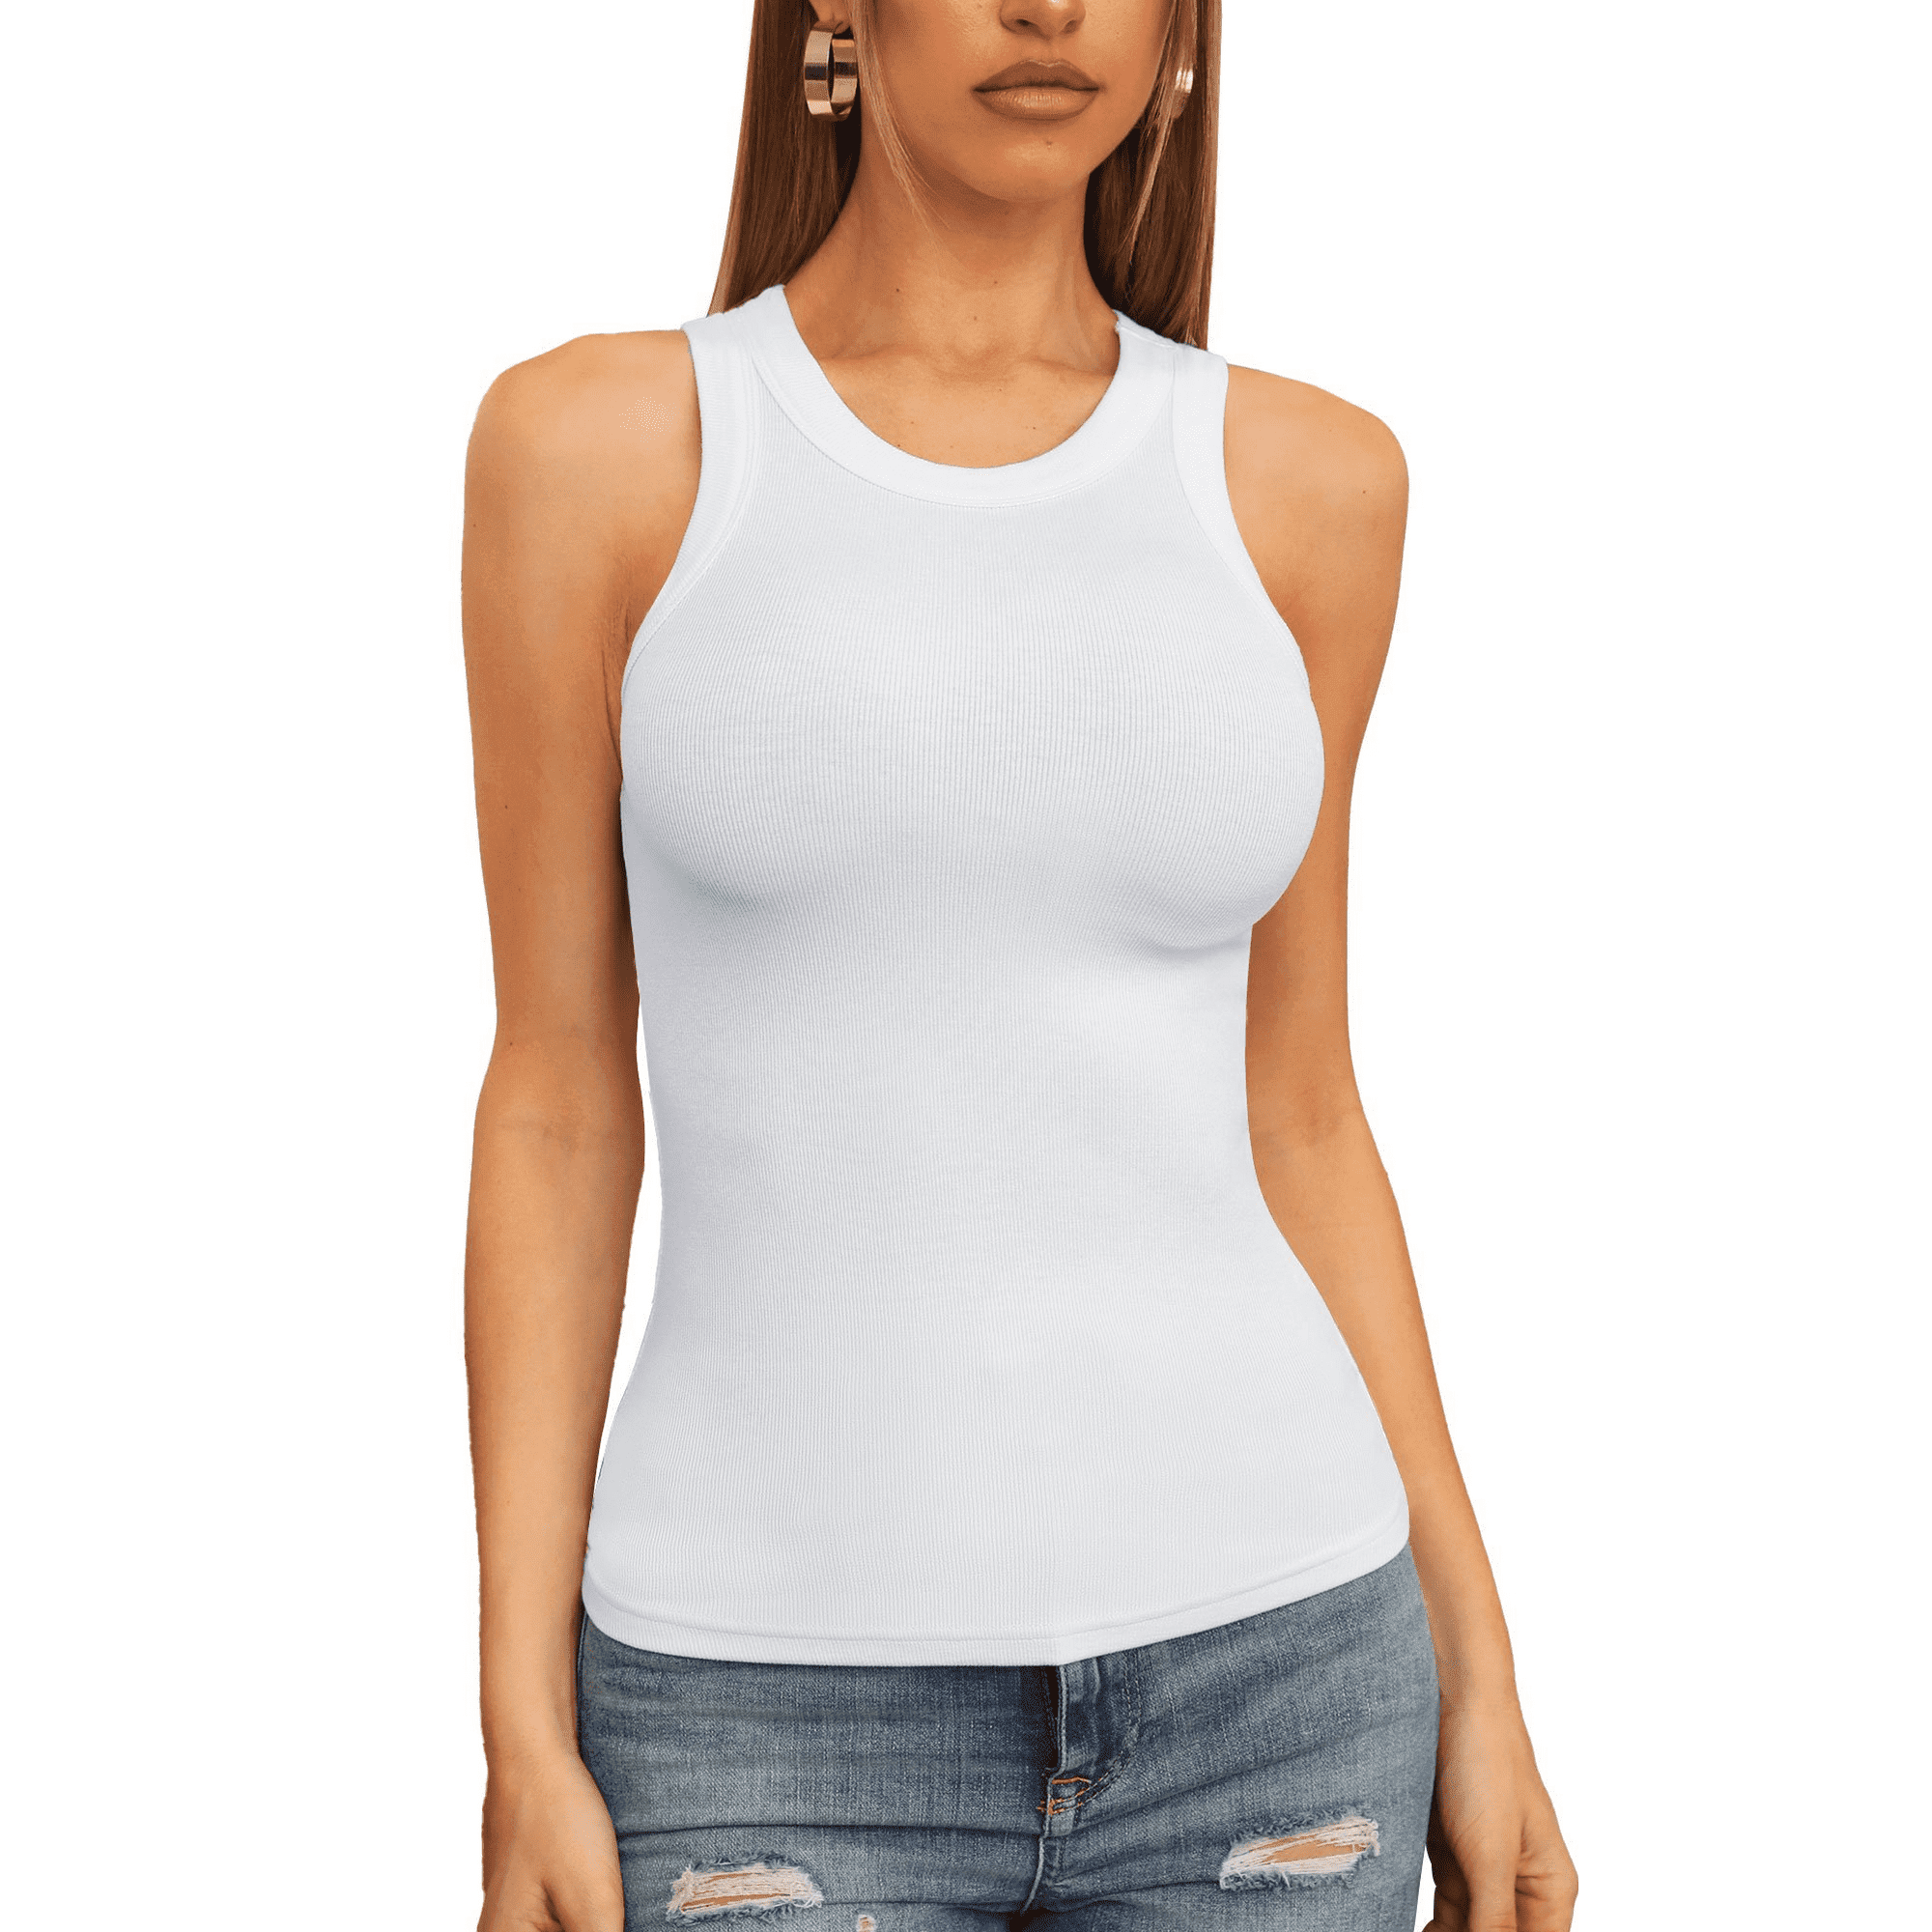 Felina Cotton Ribbed Tank Top - Class Tank Top for Women, Workout Tank Top  For Women (Color Options Available) (White, Medium) 